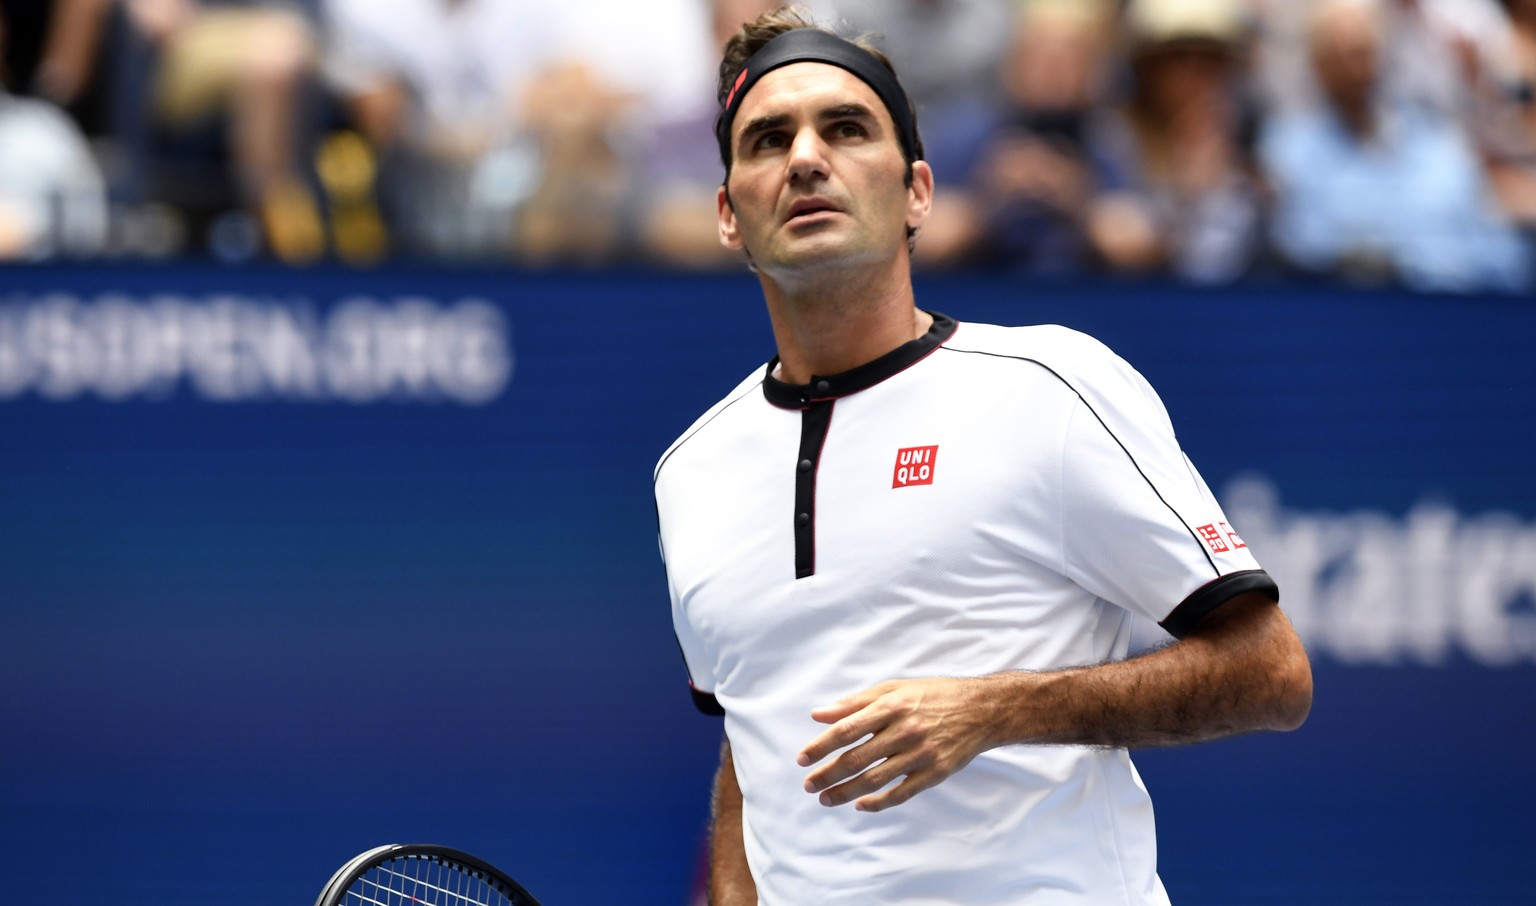 Roger Federer, of Switzerland, walks on the court to face David Goffin, of Belgium, during the fourth round of the US Open tennis championships Sunday, Sept. 1, 2019, in New York. (AP Photo/Sarah Stie ...